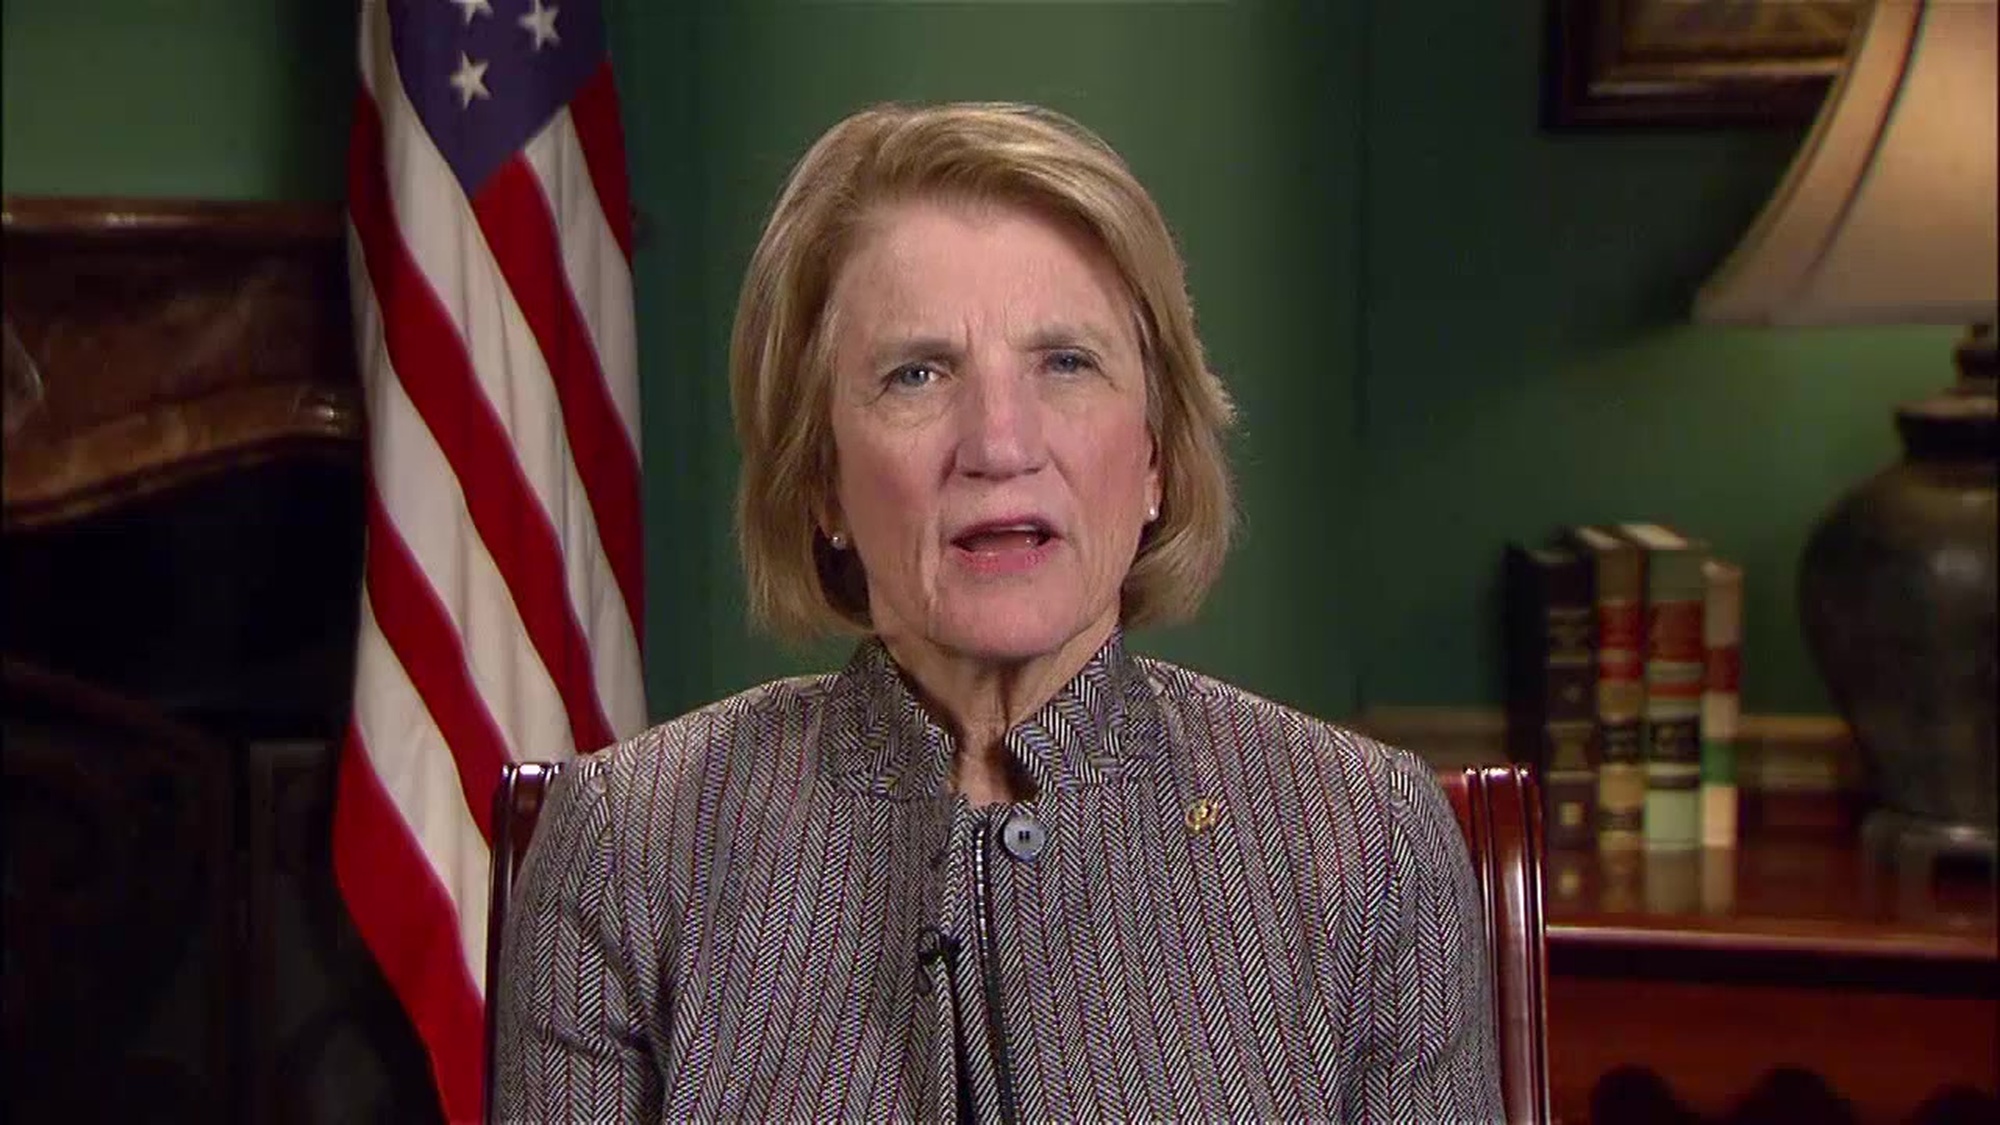 U.S. Sen. Shelley Moore Capito, West Virginia, provides insights and comments about the Junior ROTC program, and the importance of citizenship development.